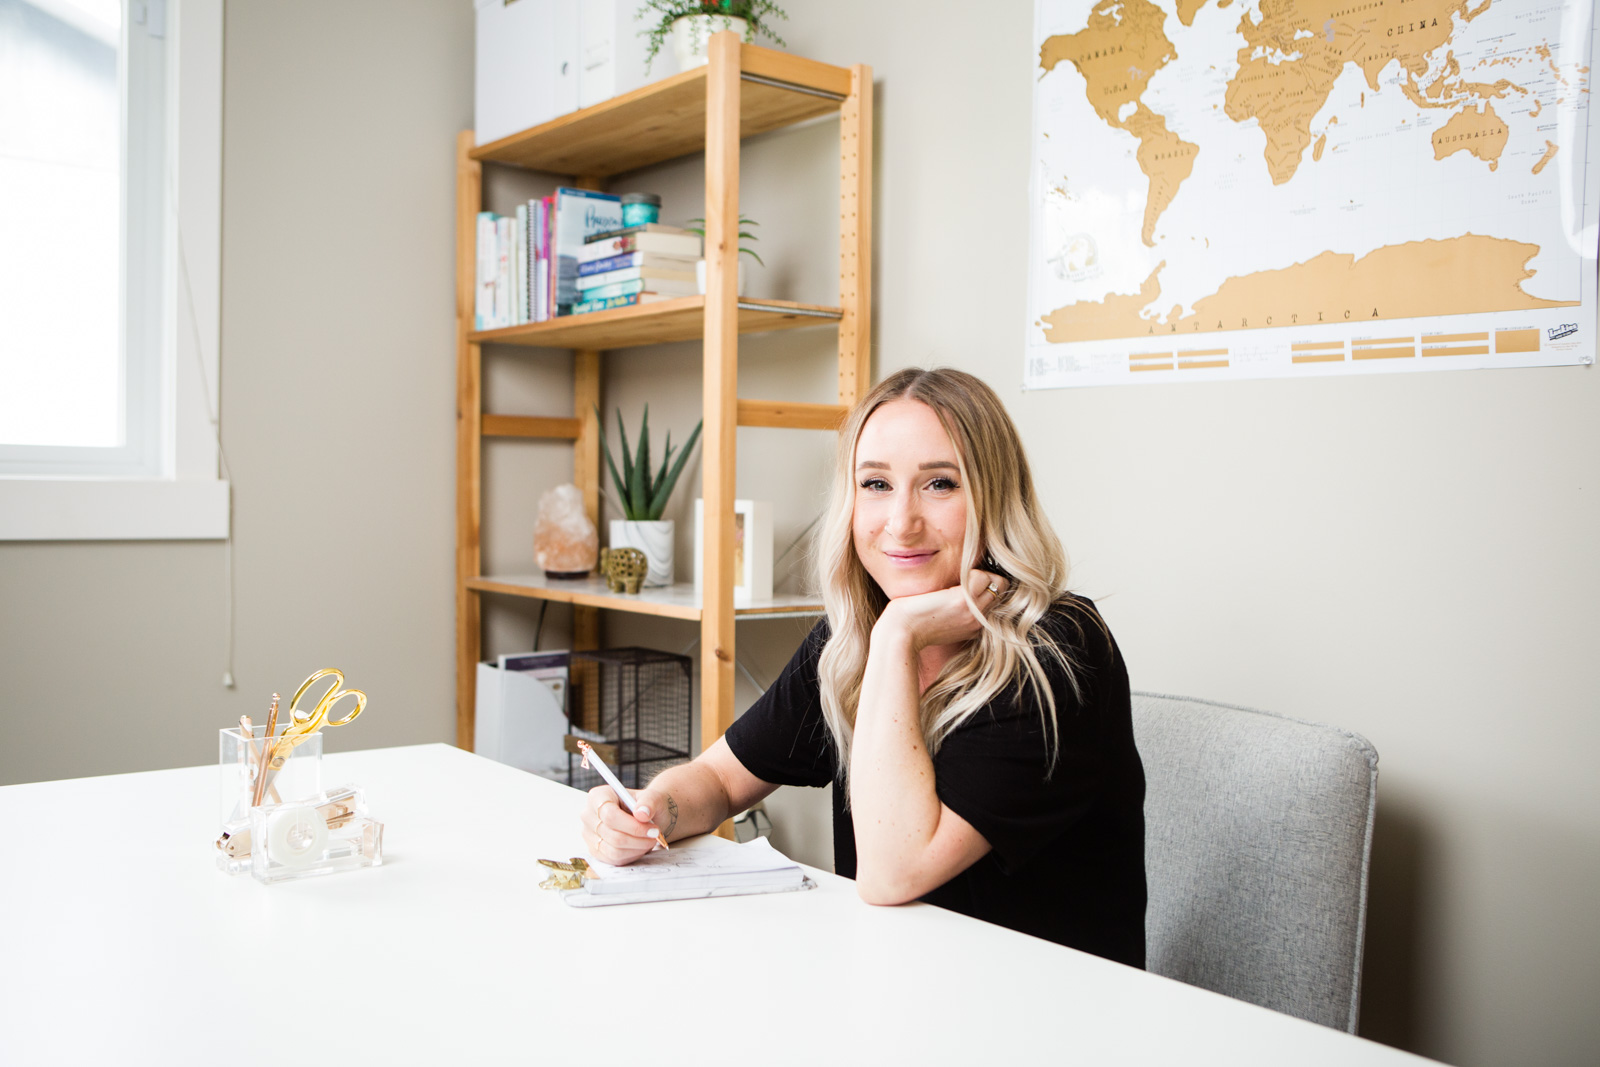 A personal brand lifestyle photo of a woman sitting at her office desk smiling